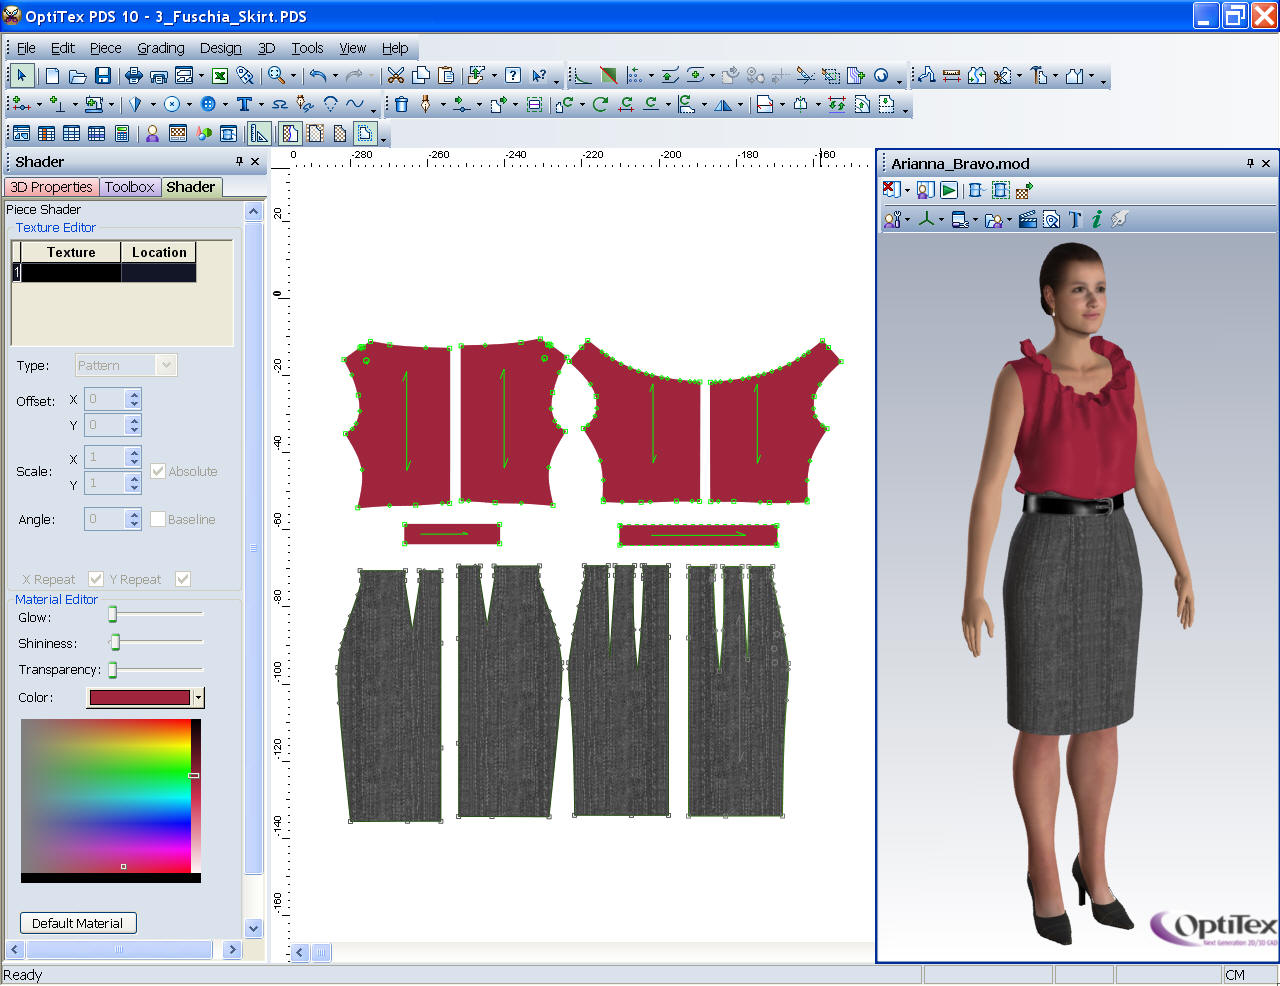 Customize Sewing Patterns with Computer Software - Yahoo! Voices